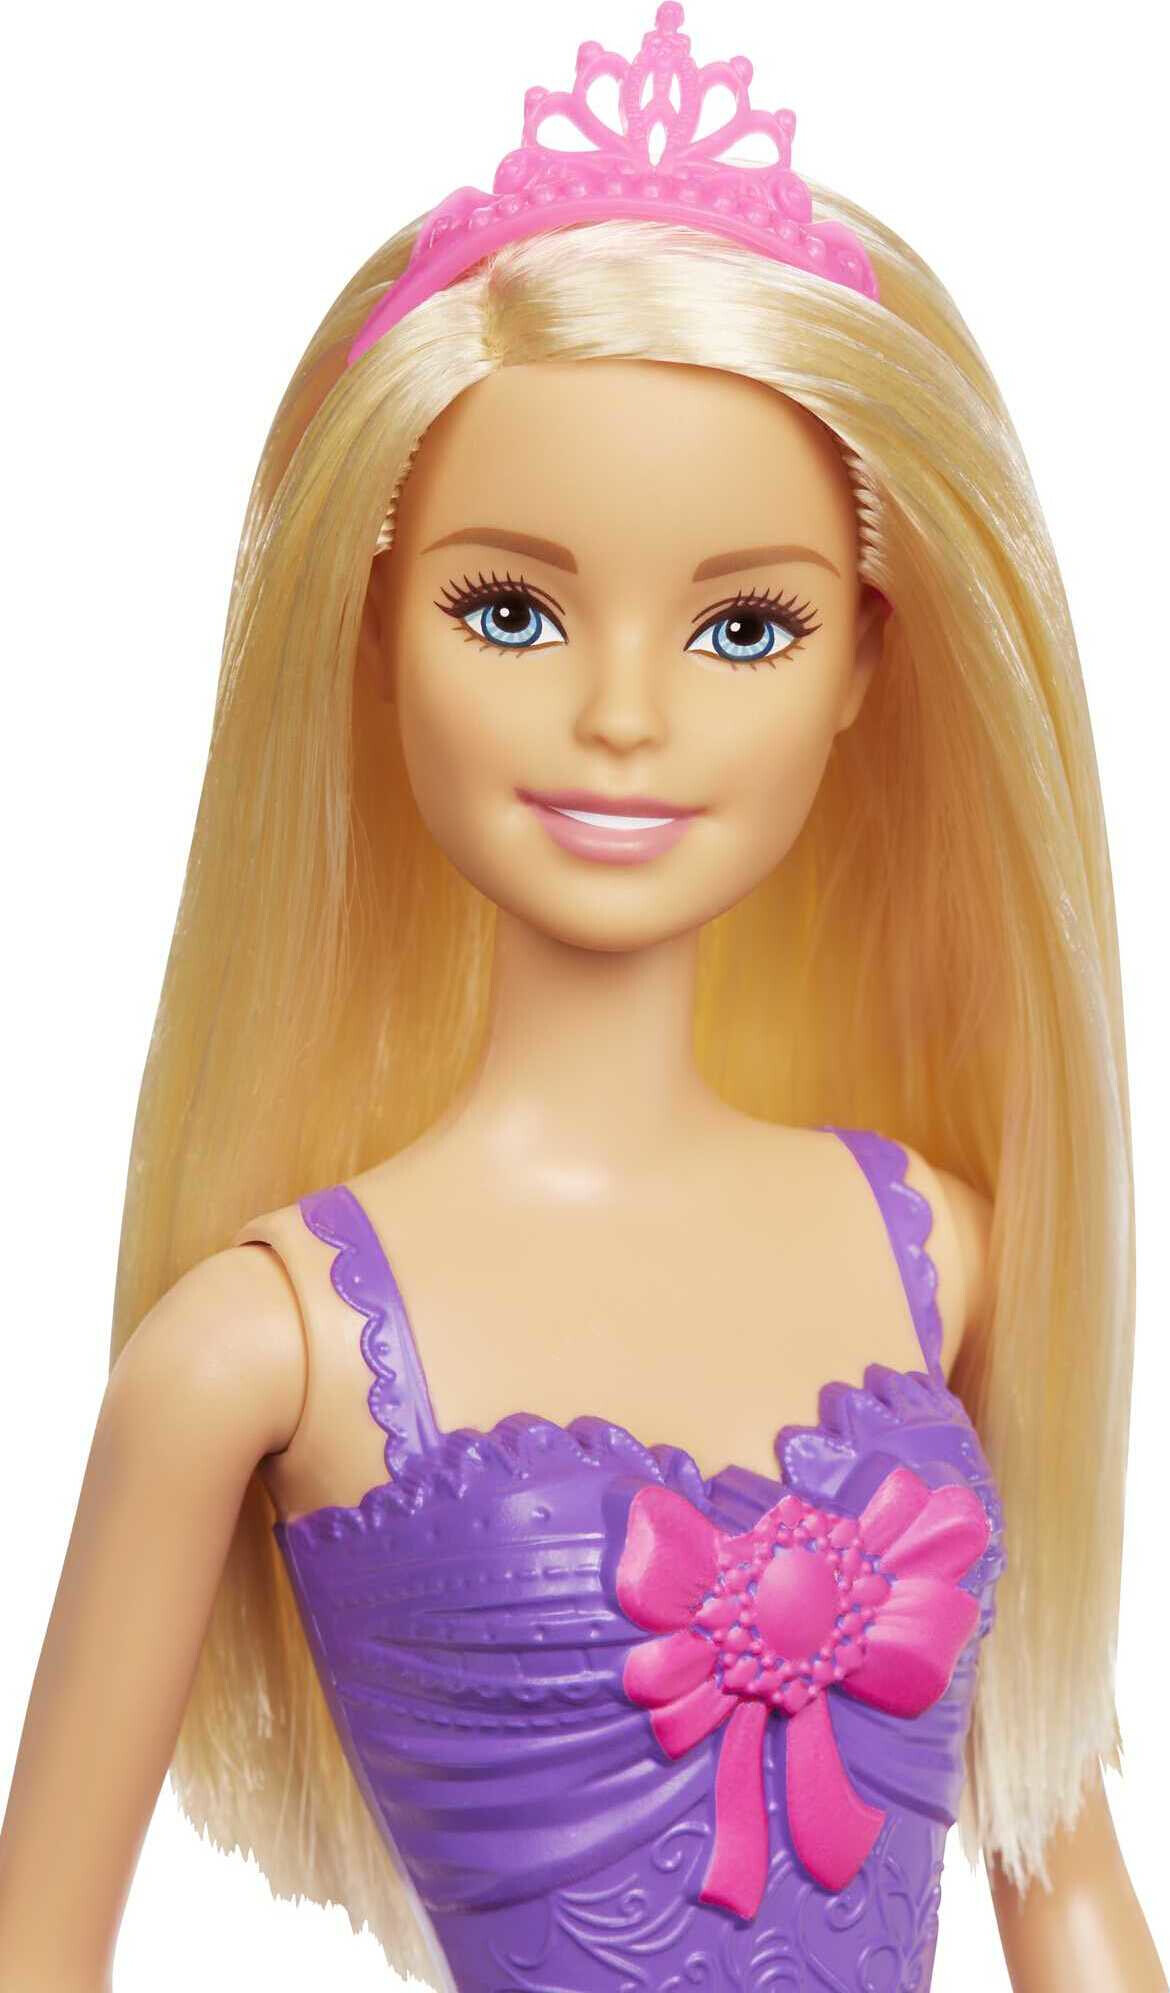 Barbie Dreamtopia Royal Doll with Blonde Hair, Shimmery Pink Skirt & Headband Accessory - image 2 of 4